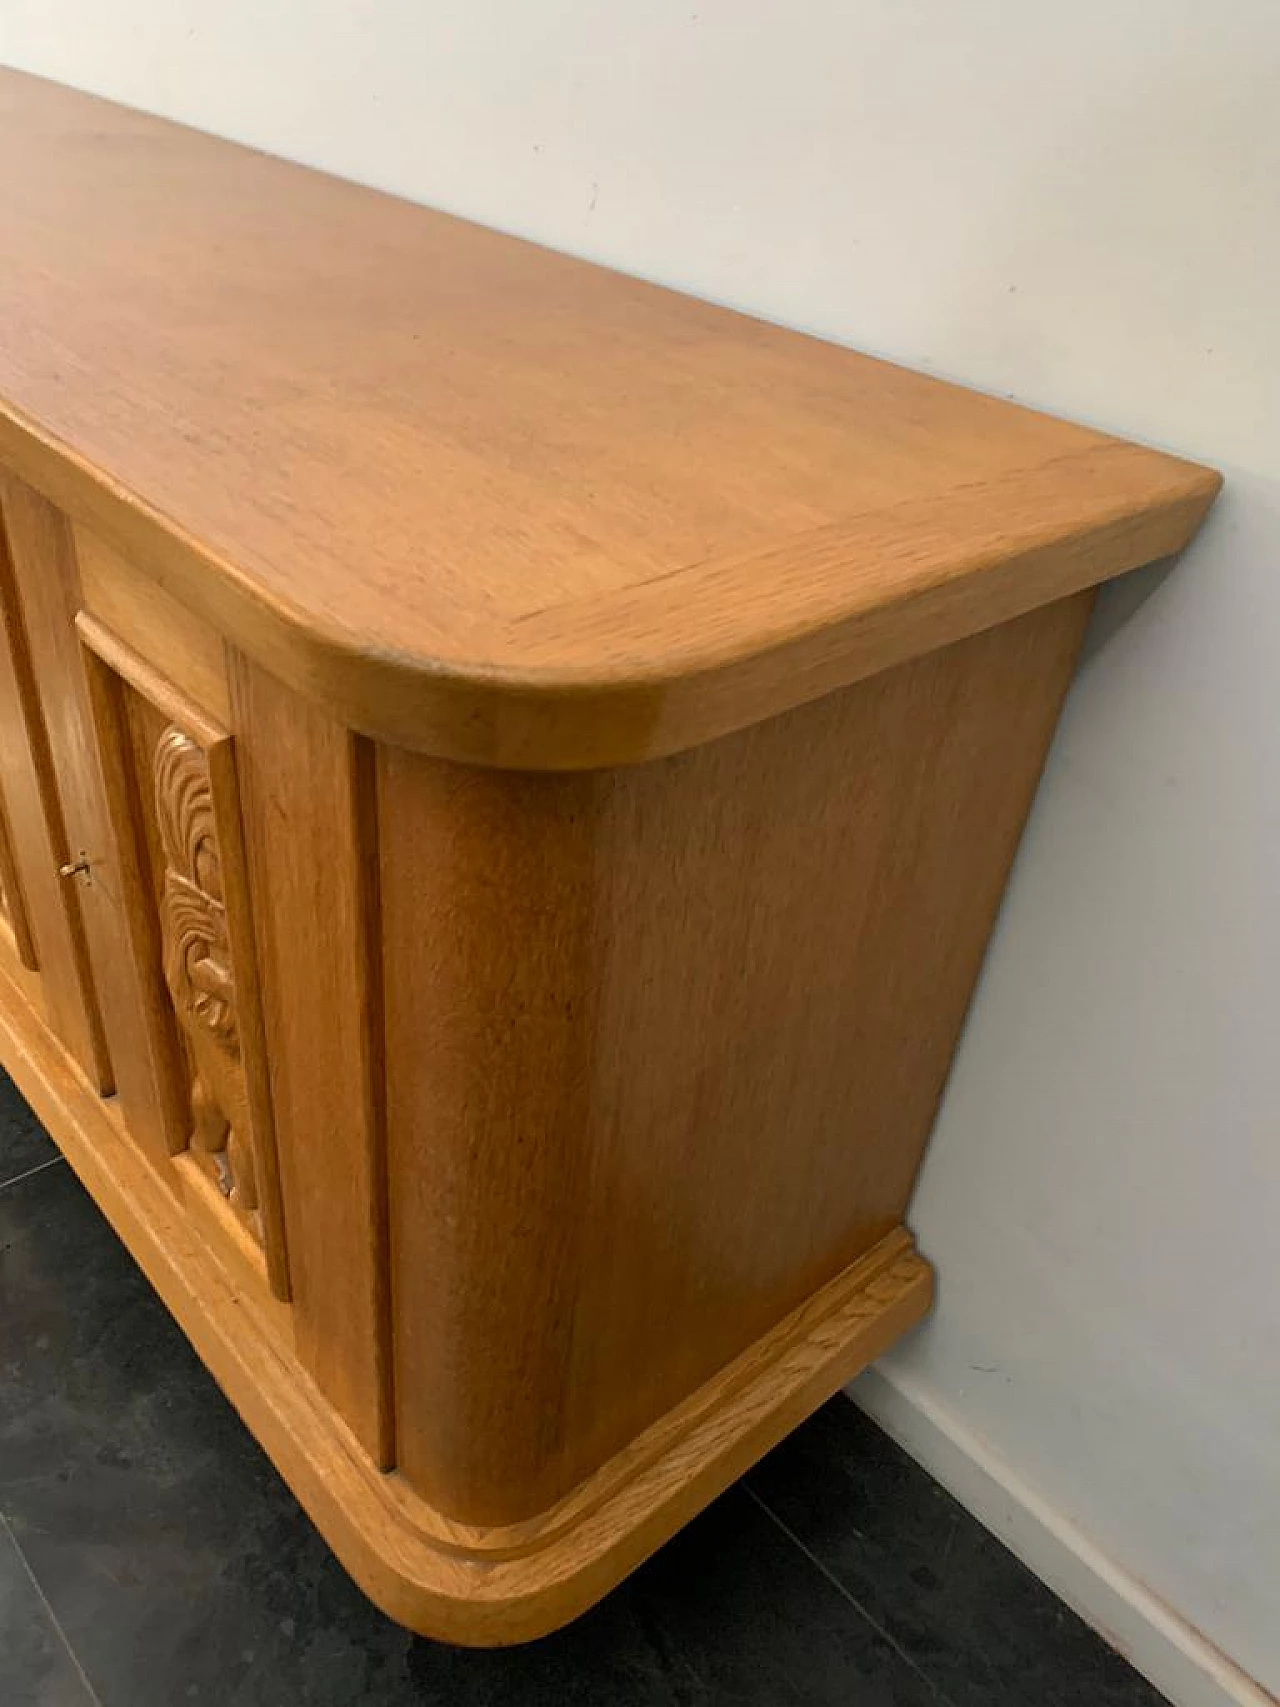 Ash wood sideboard with carved panels, 1930s 1204584